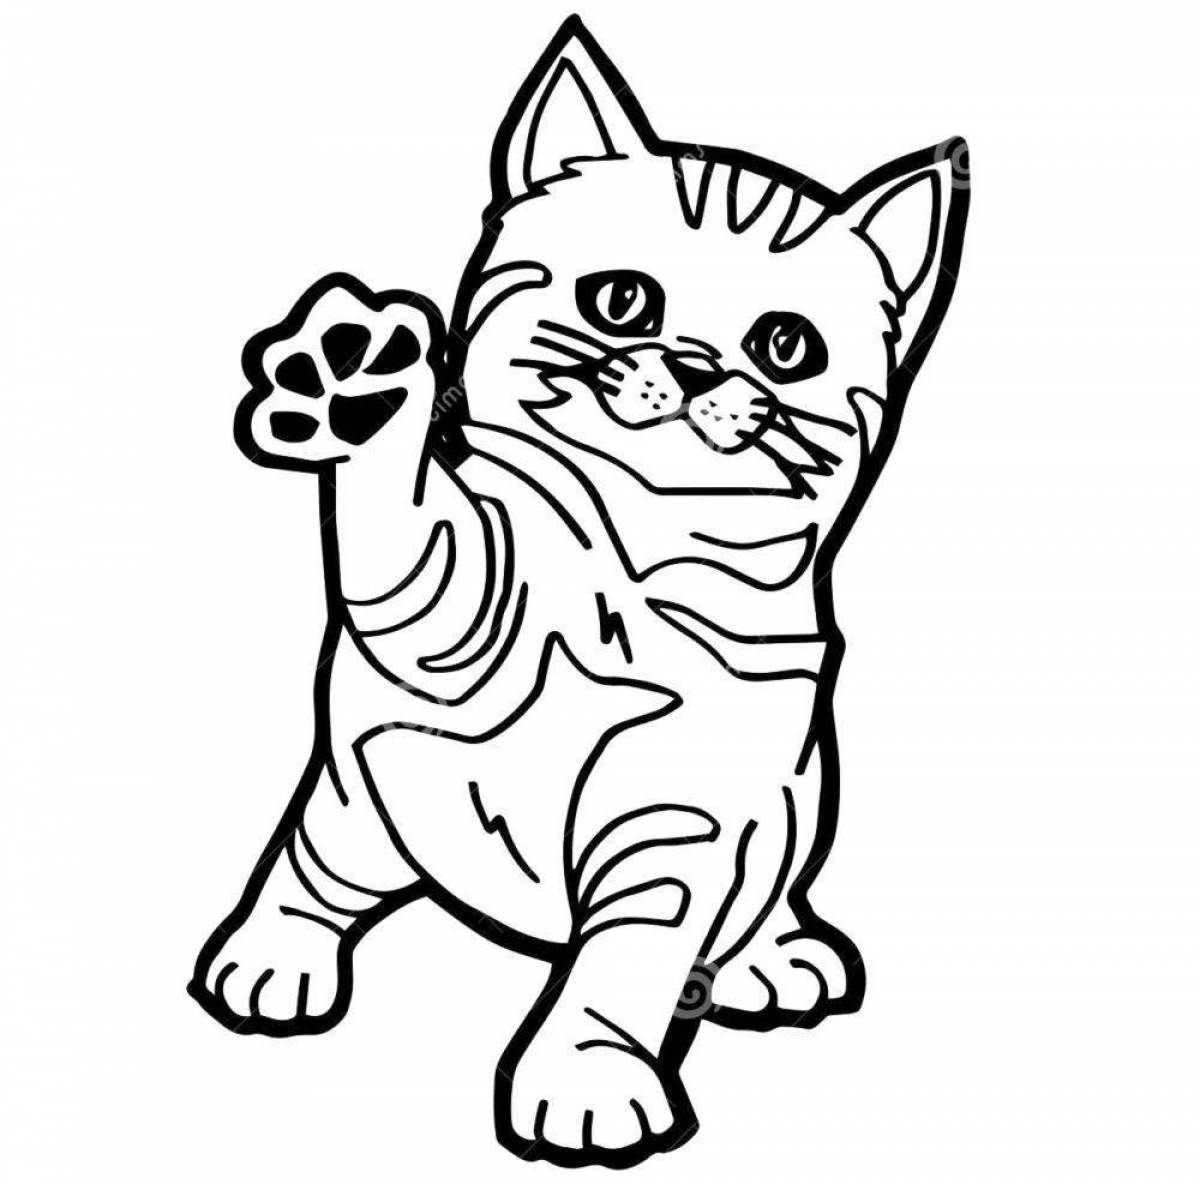 Coloring page bizarre fold cat